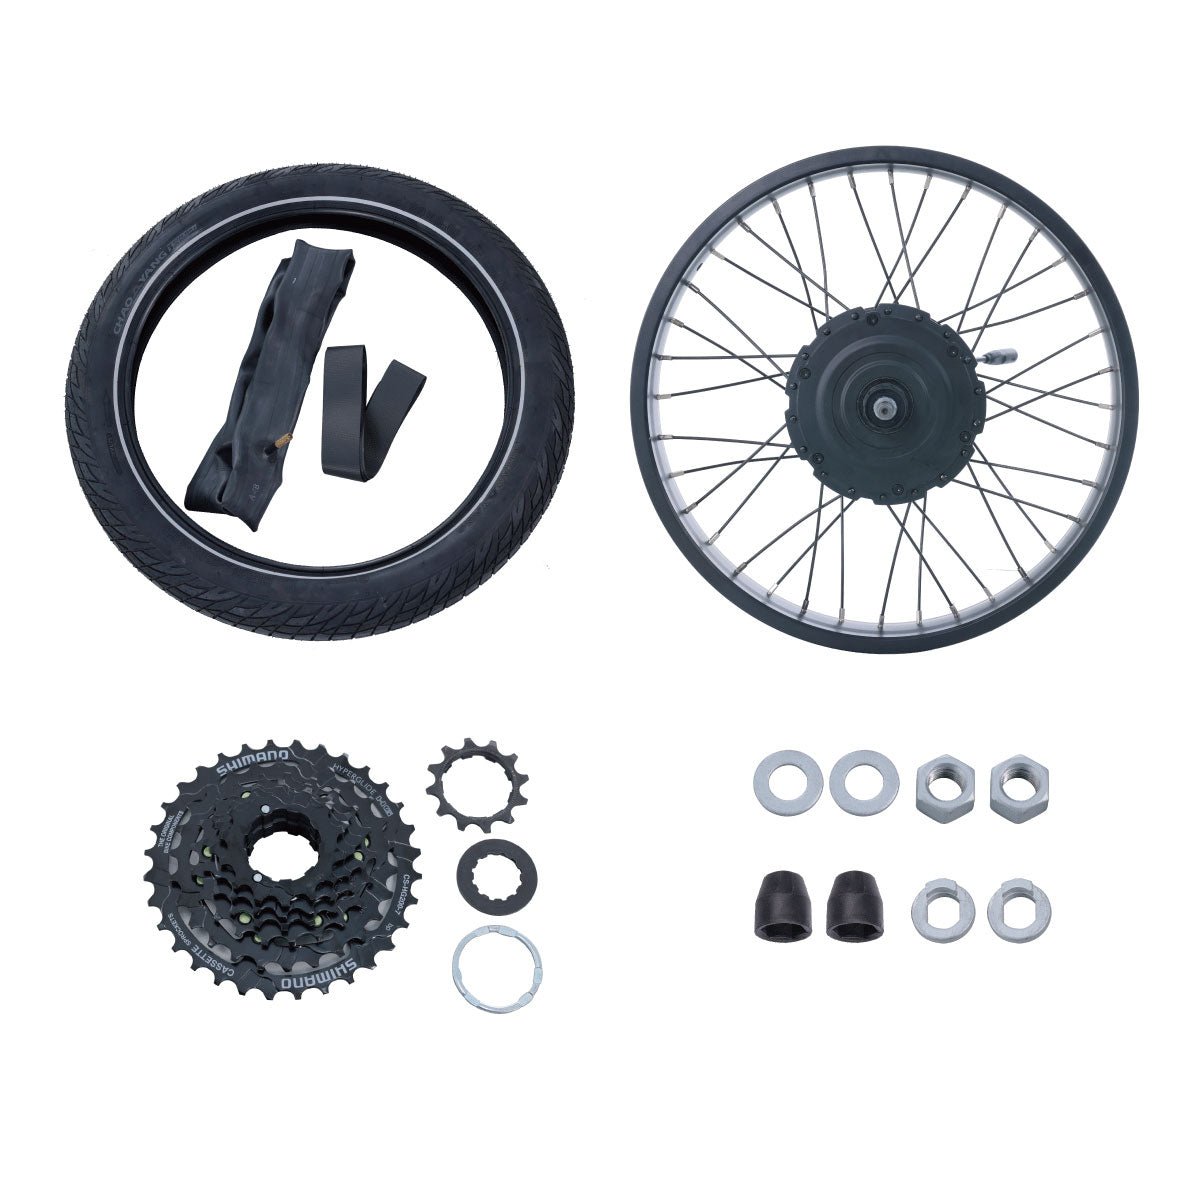 Wheel Assembly Replacement for Denago Folding eBike (Z202)